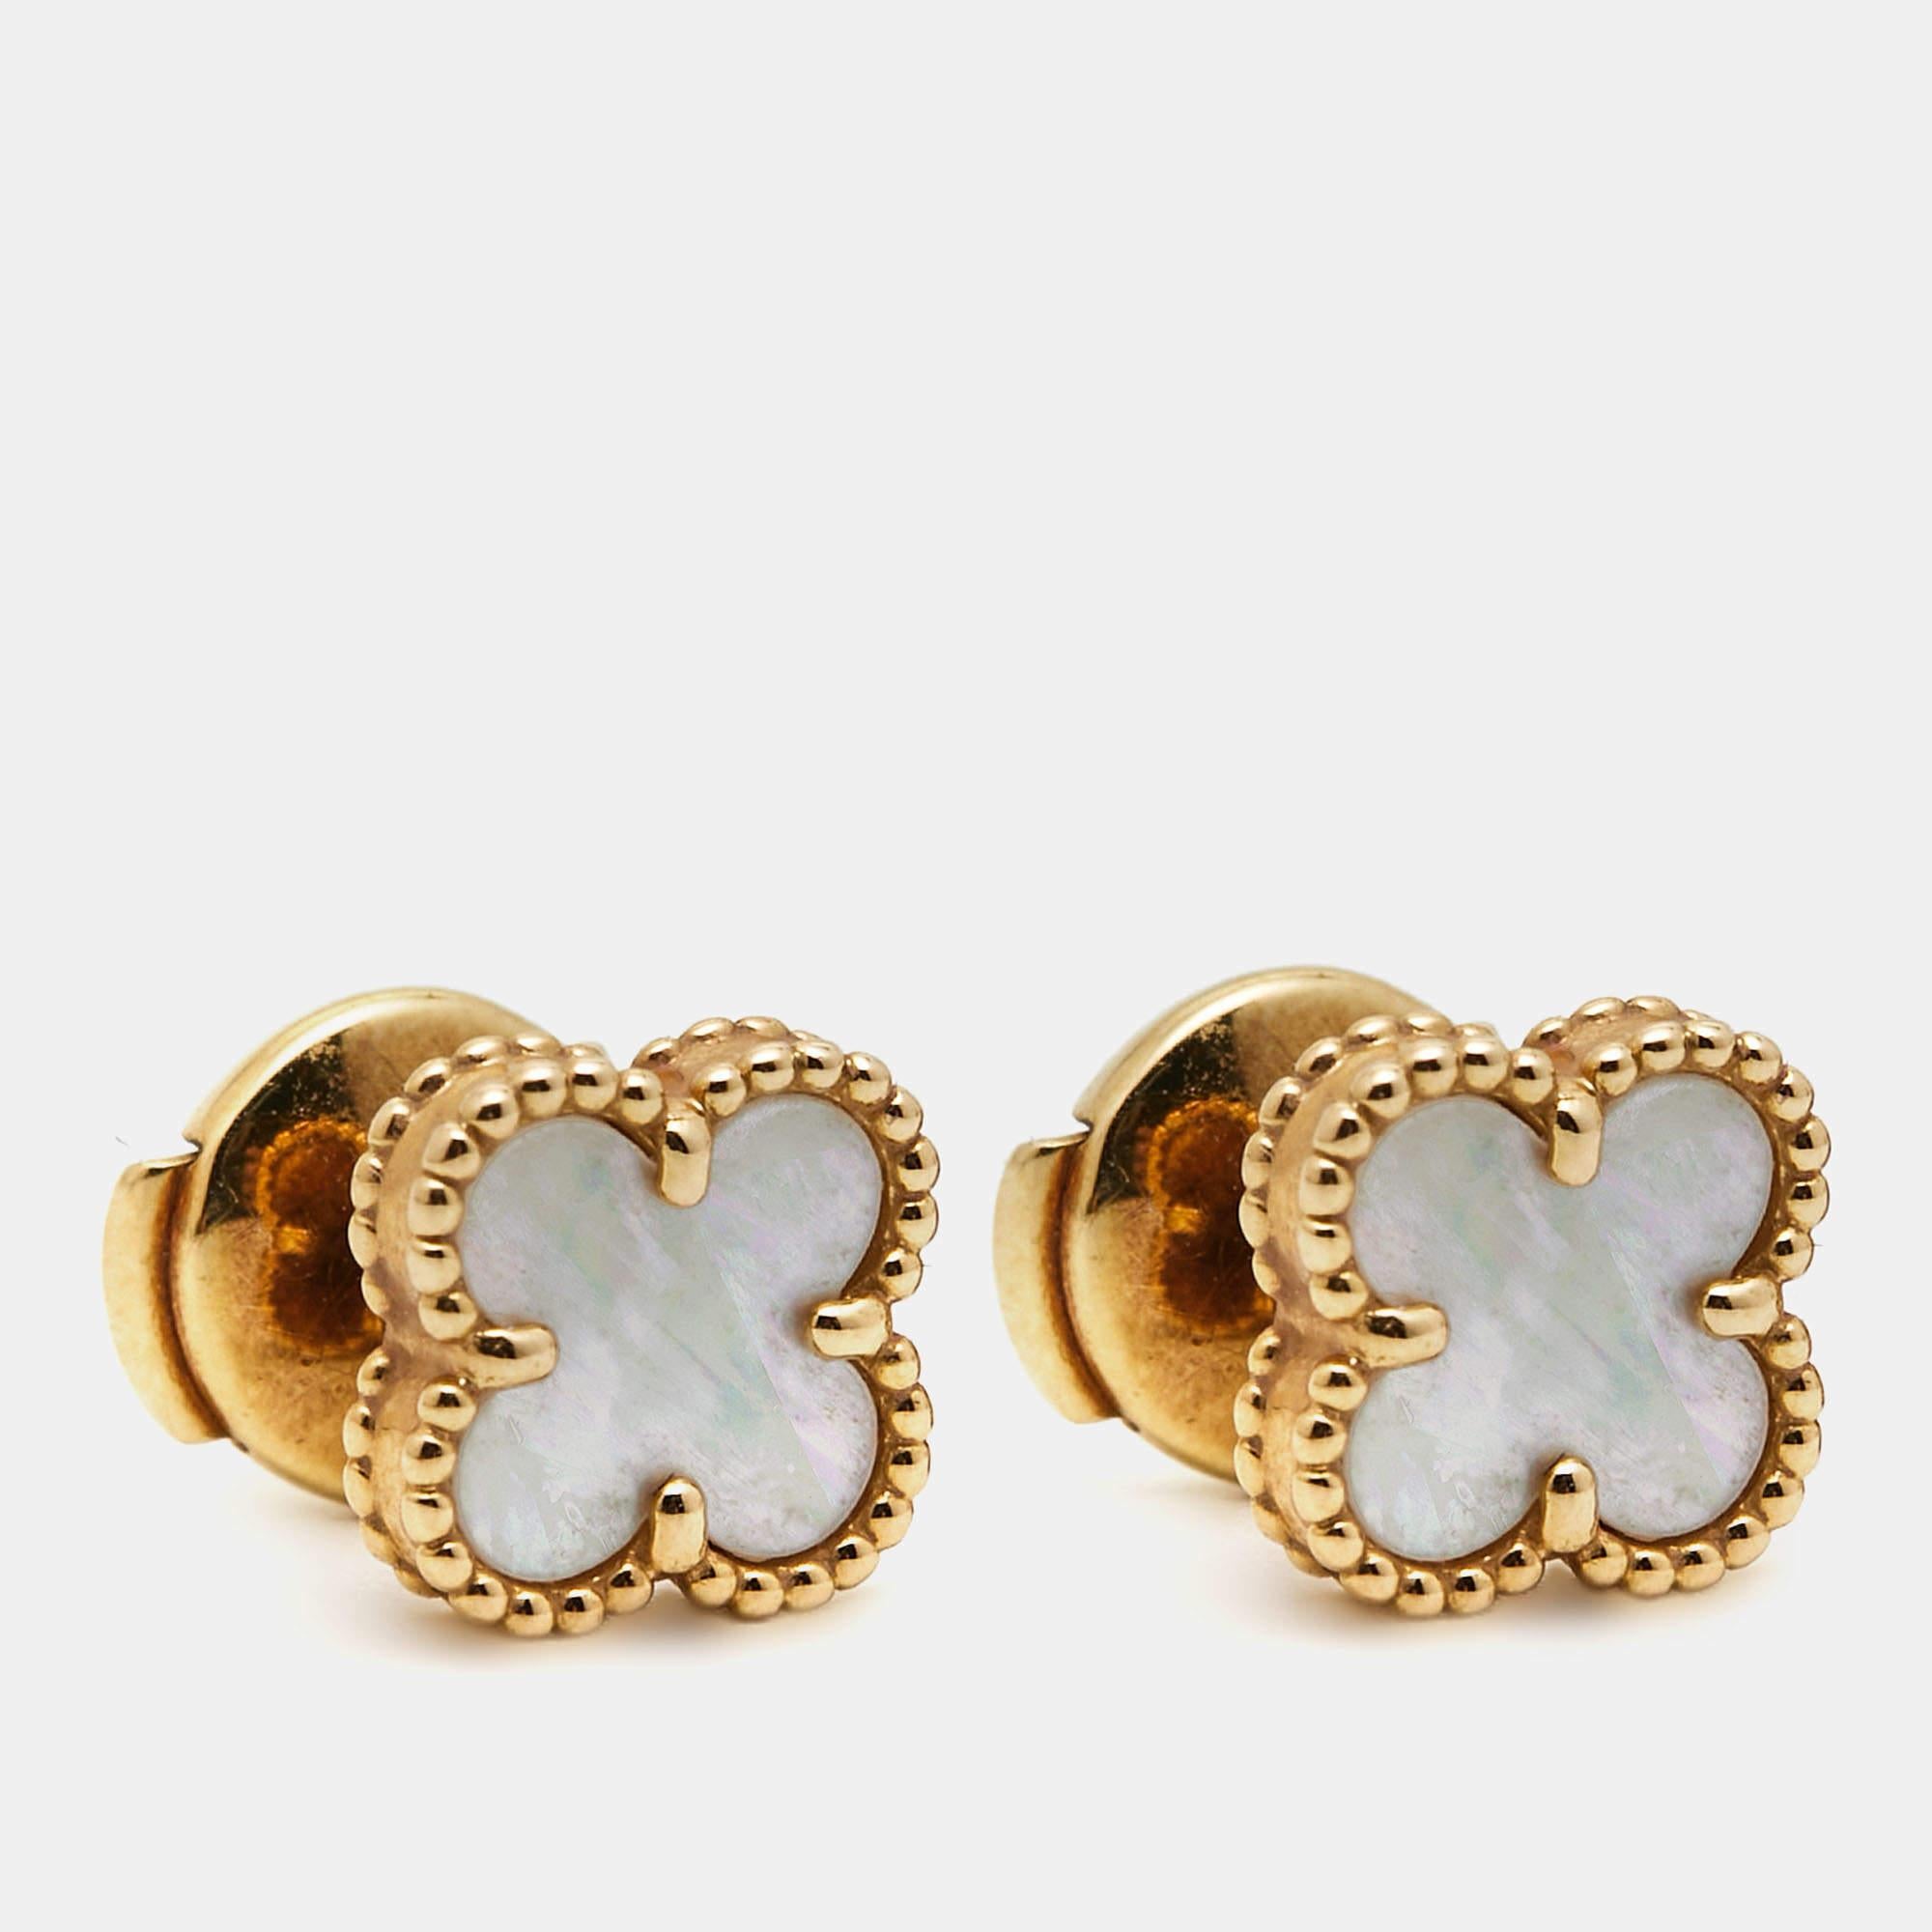 Part of the Sweet Alhambra collection, these Van Cleef & Arpels earrings are dainty beauties that will elevate any outfit. The four-leaf clover design is designed with 18k yellow gold and has mother-of-pearl inlay.

Includes
Original Case